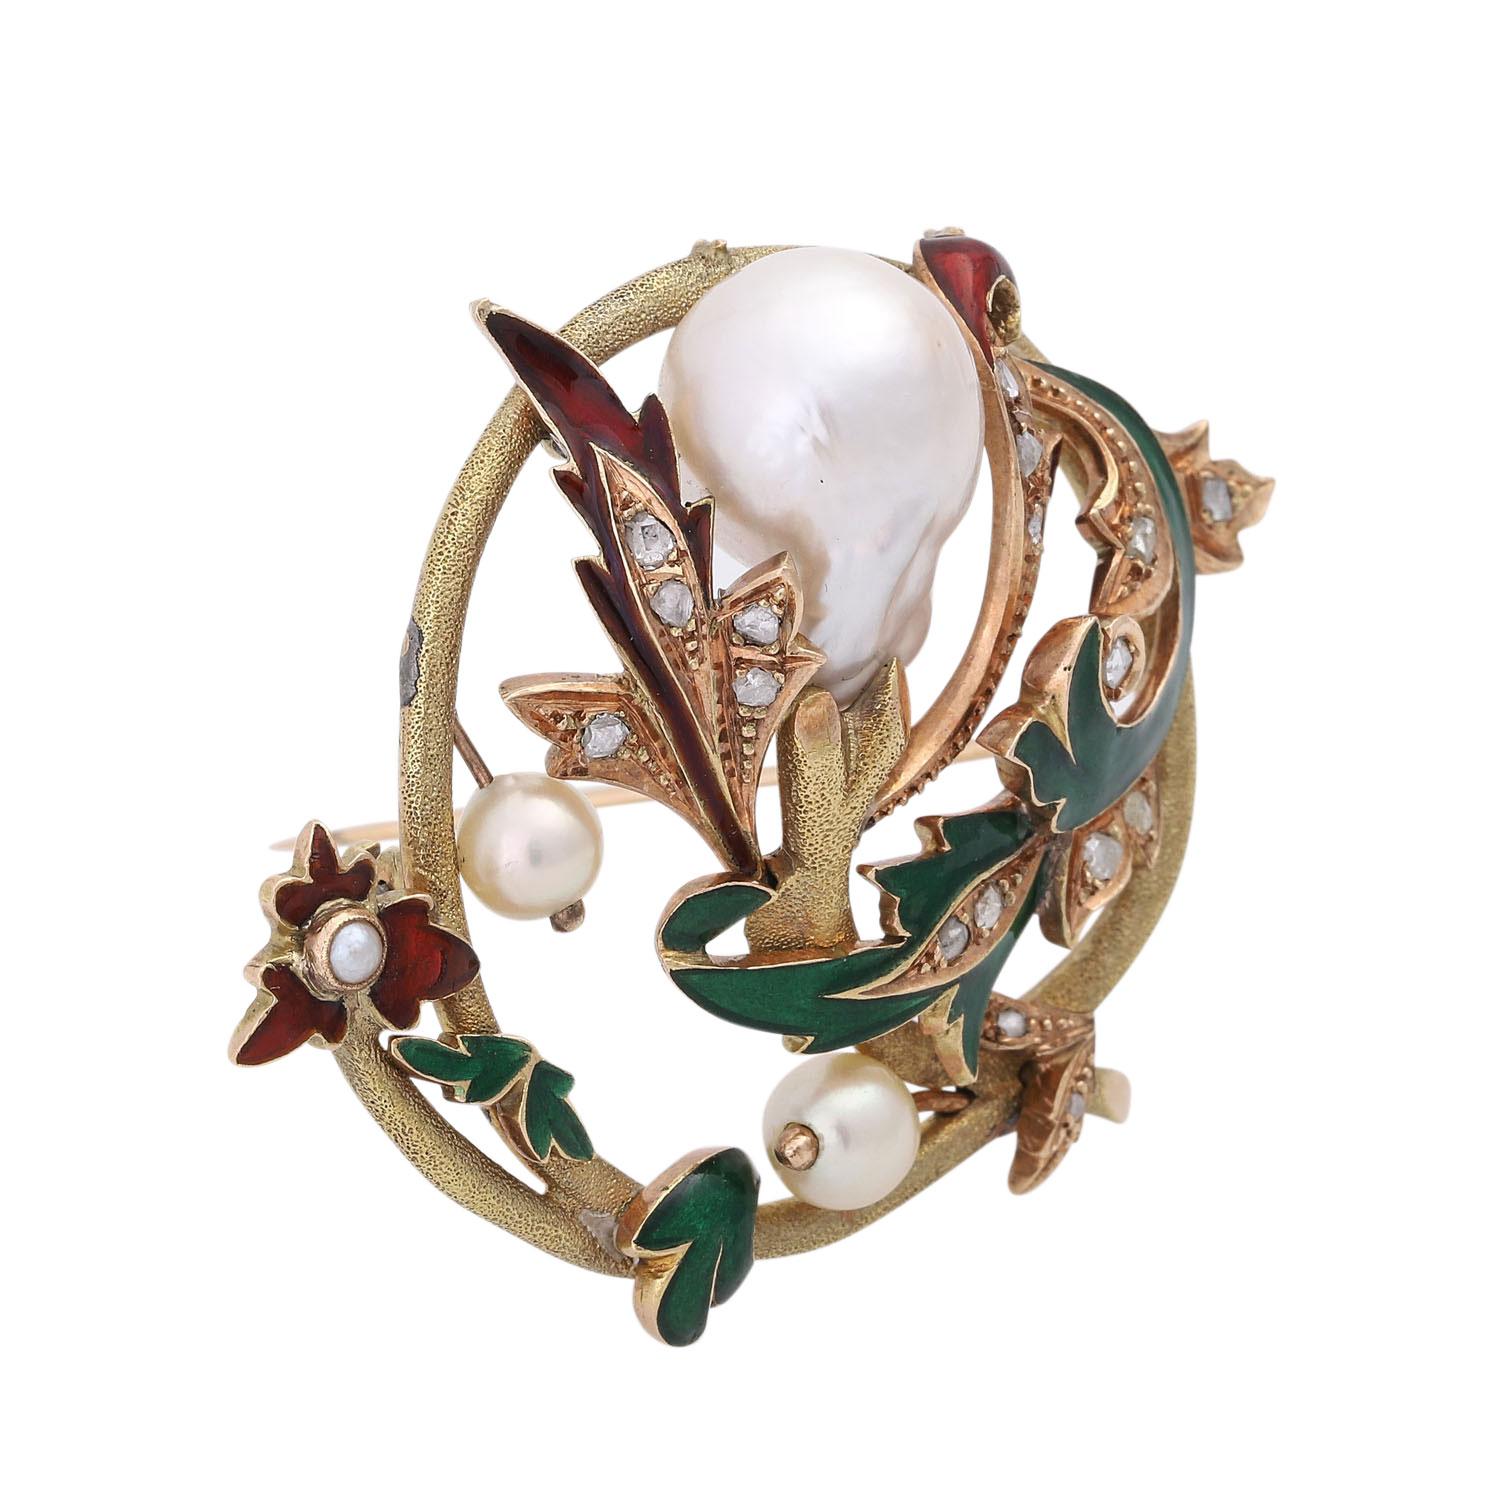 Floral brooch with cultured pearls and diamond roses, details red and green enamelled, GG. 53x42 mm, signs of wear, stones/enamel partly damaged/m. small eruptions, back Traces of solder, brooch composed of several parts.

Brooch with cultured